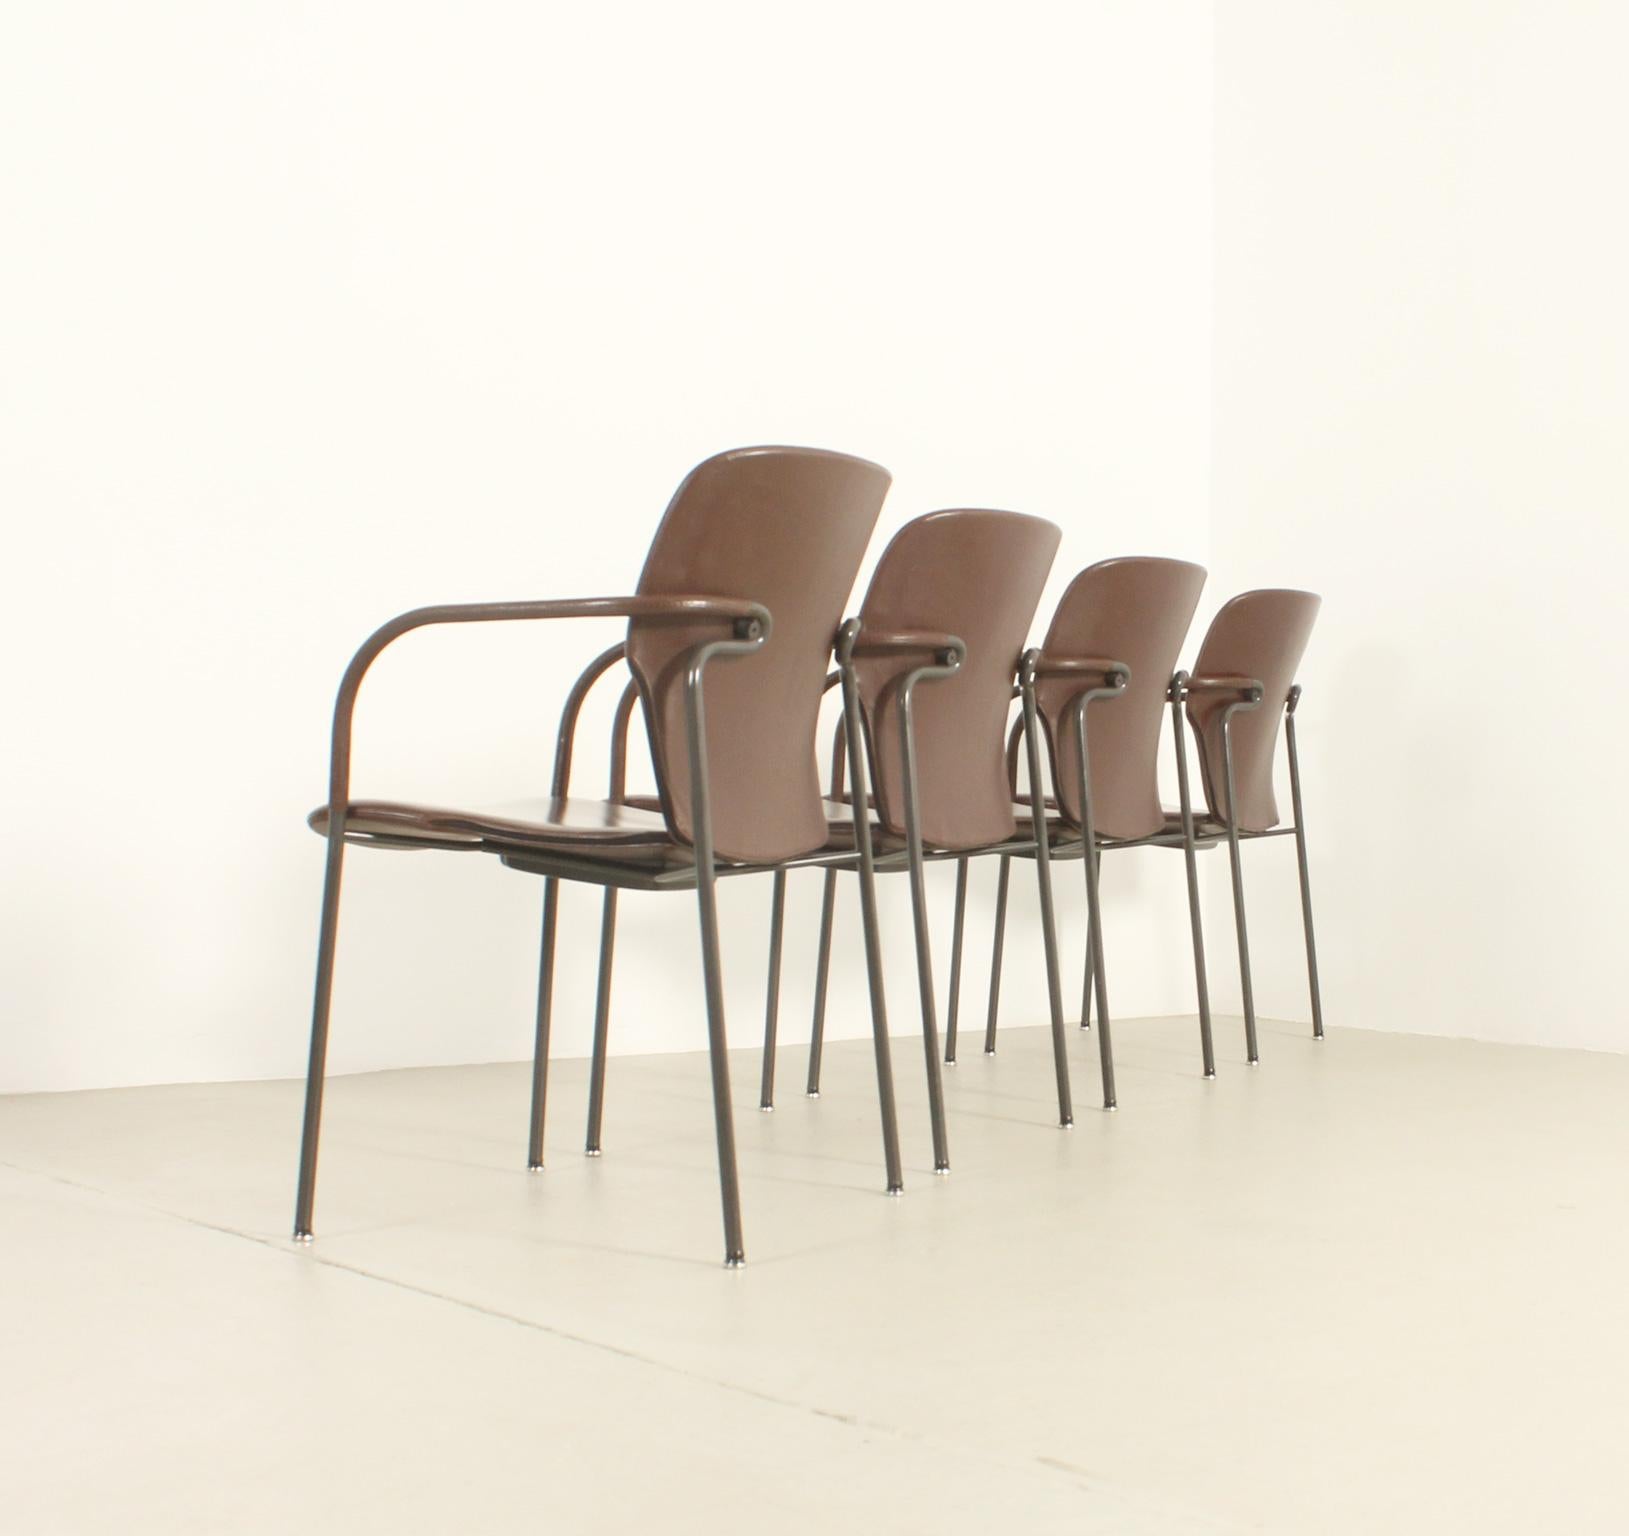 Four Leather Lalanda Chairs by Gianfranco Frattini, 1980's For Sale 8